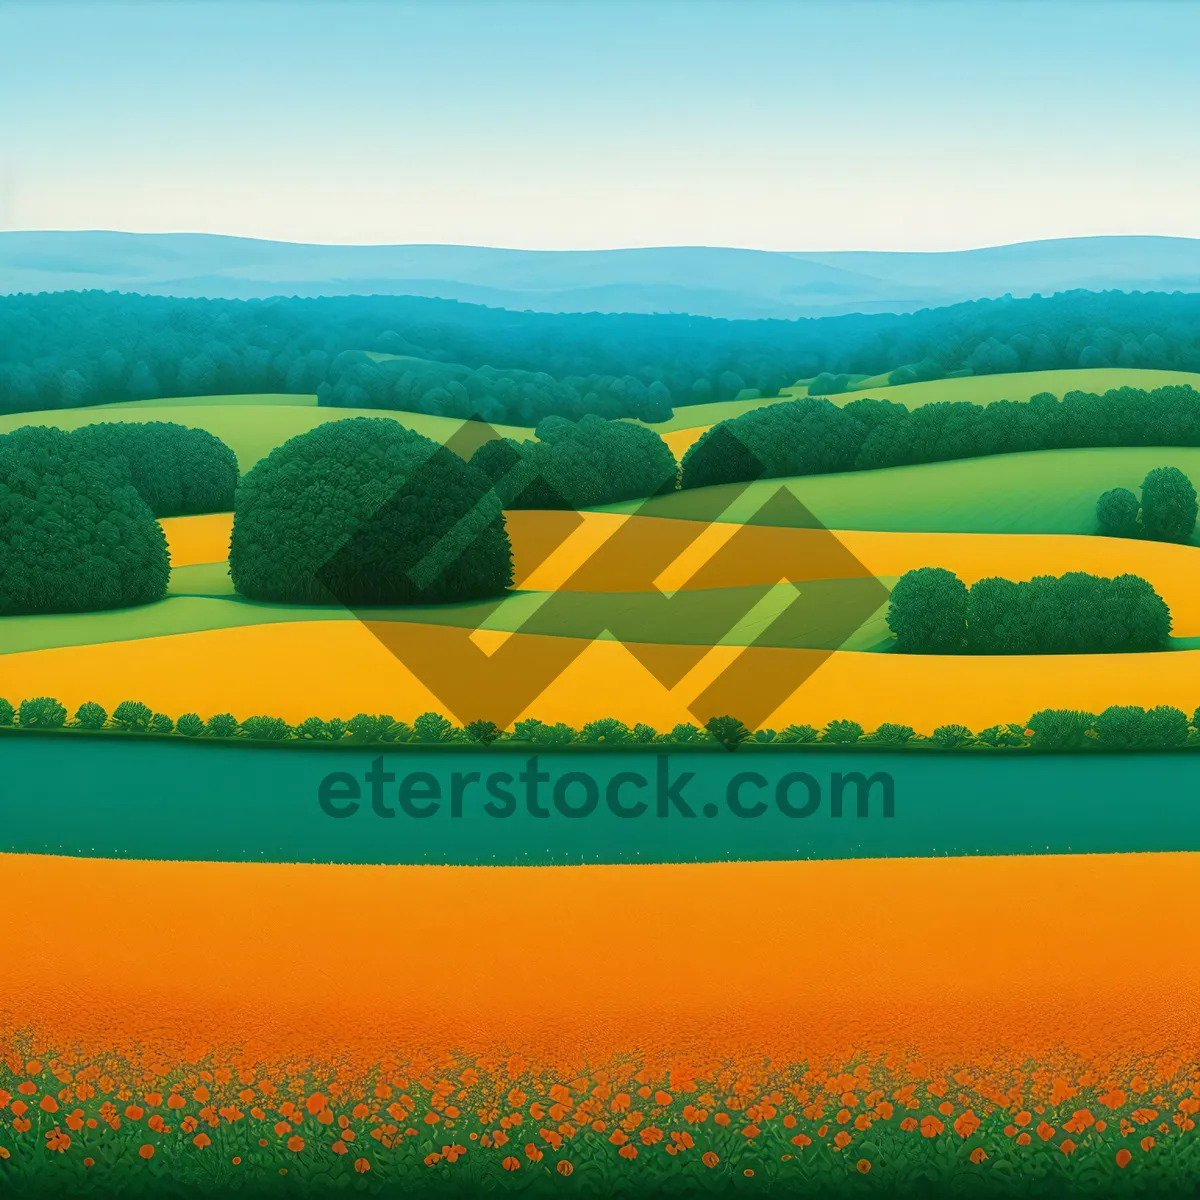 Picture of Countryside Landscape - Summer Fields Under Clear Sky.